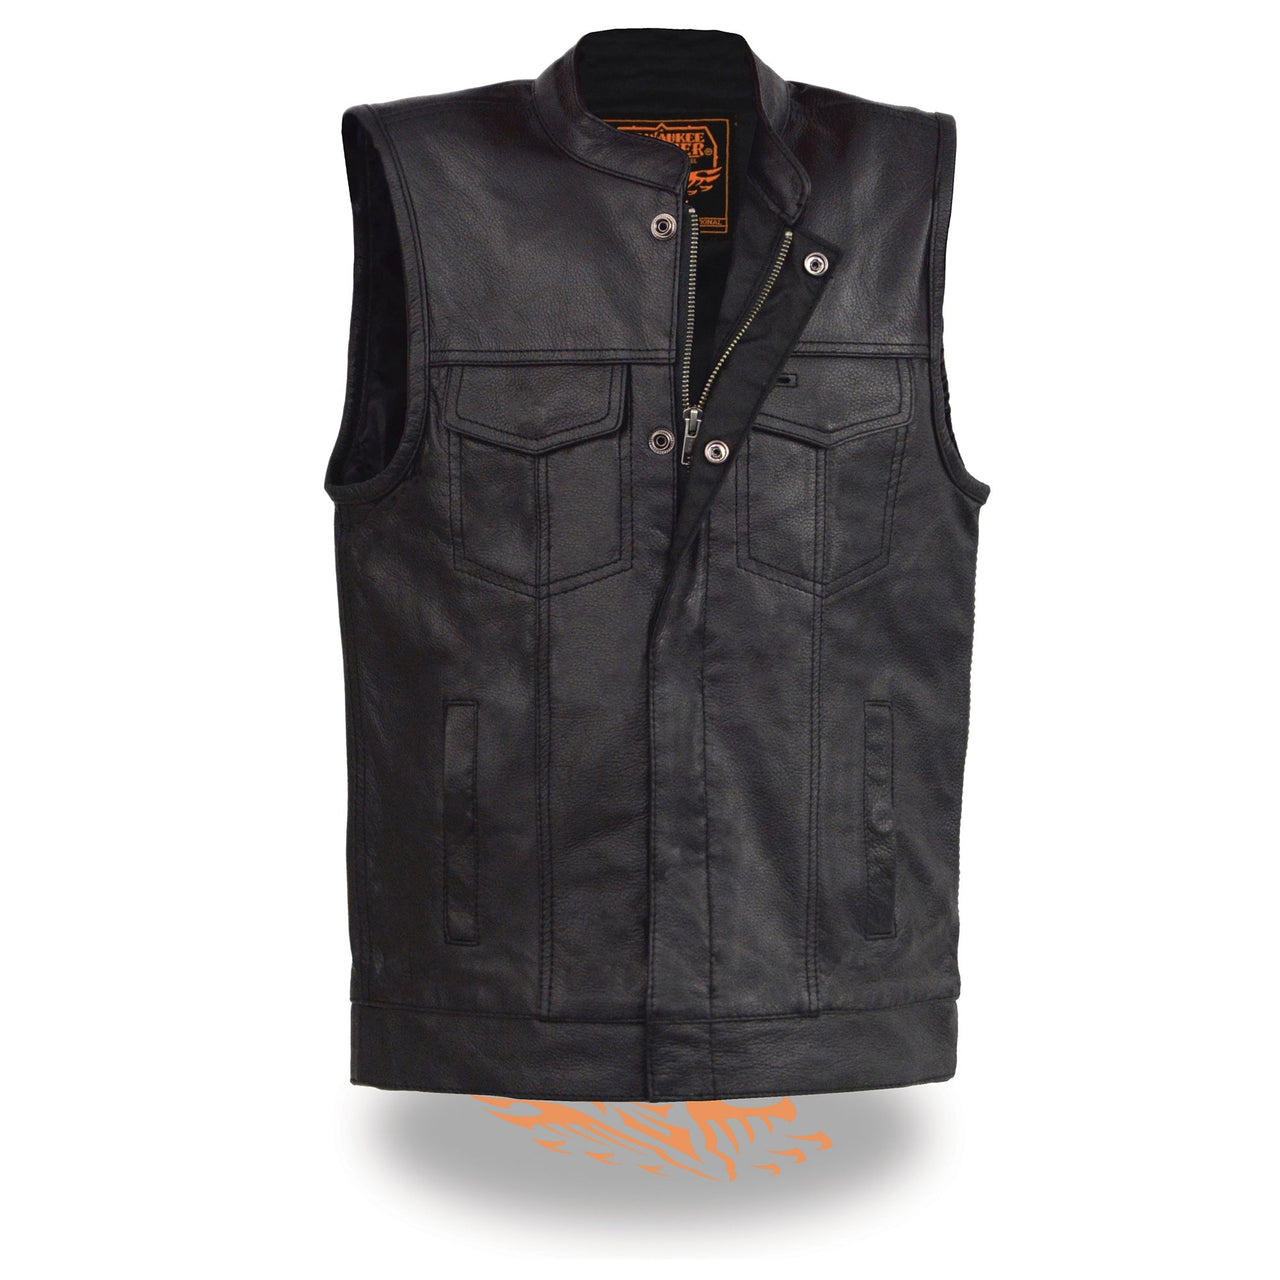 Youth Size Open Neck Snap/Zip Front Club Style Vest - HighwayLeather